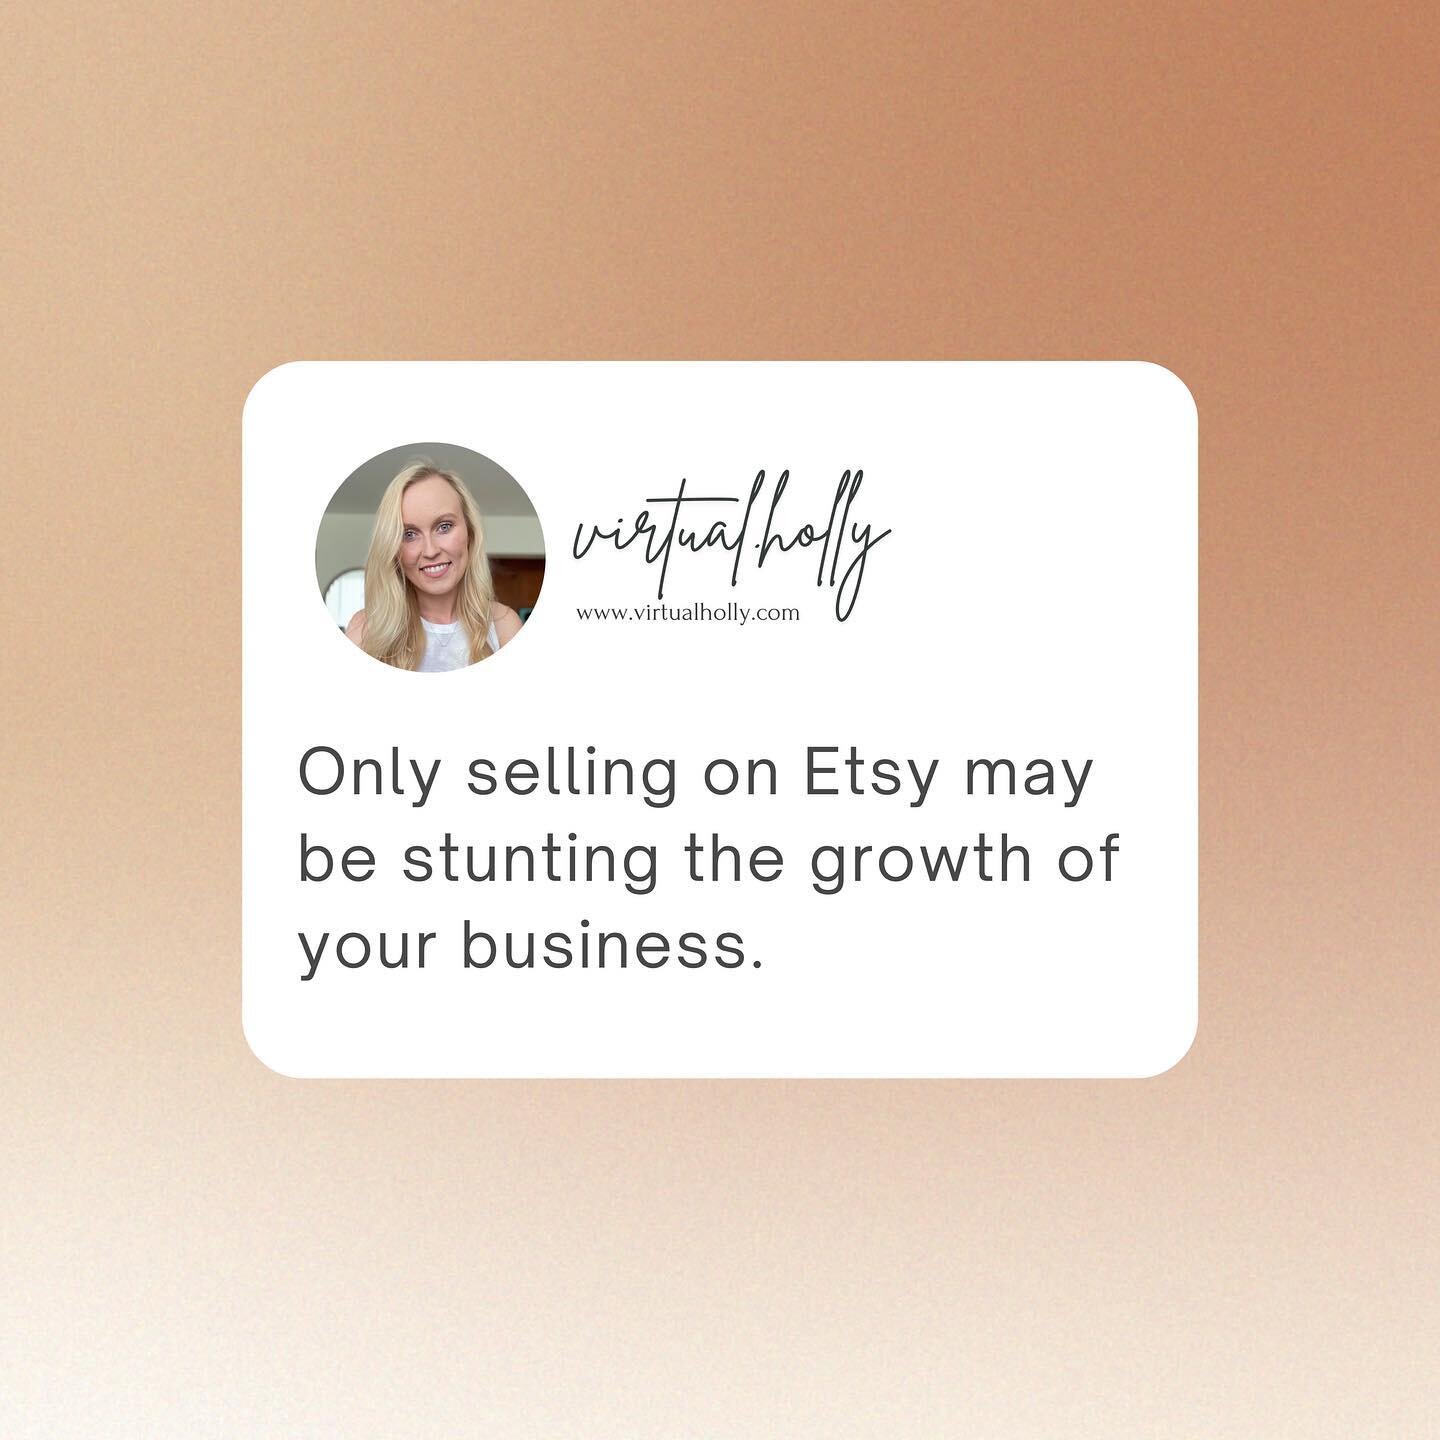 Here is a hard truth🔥.. You are still only selling on Etsy because you are using it as a safety blanket🤷🏼&zwj;♀️

You may actually be stunting your growth by staying on Etsy. Here are some ways you could be growing your business if you hosted your